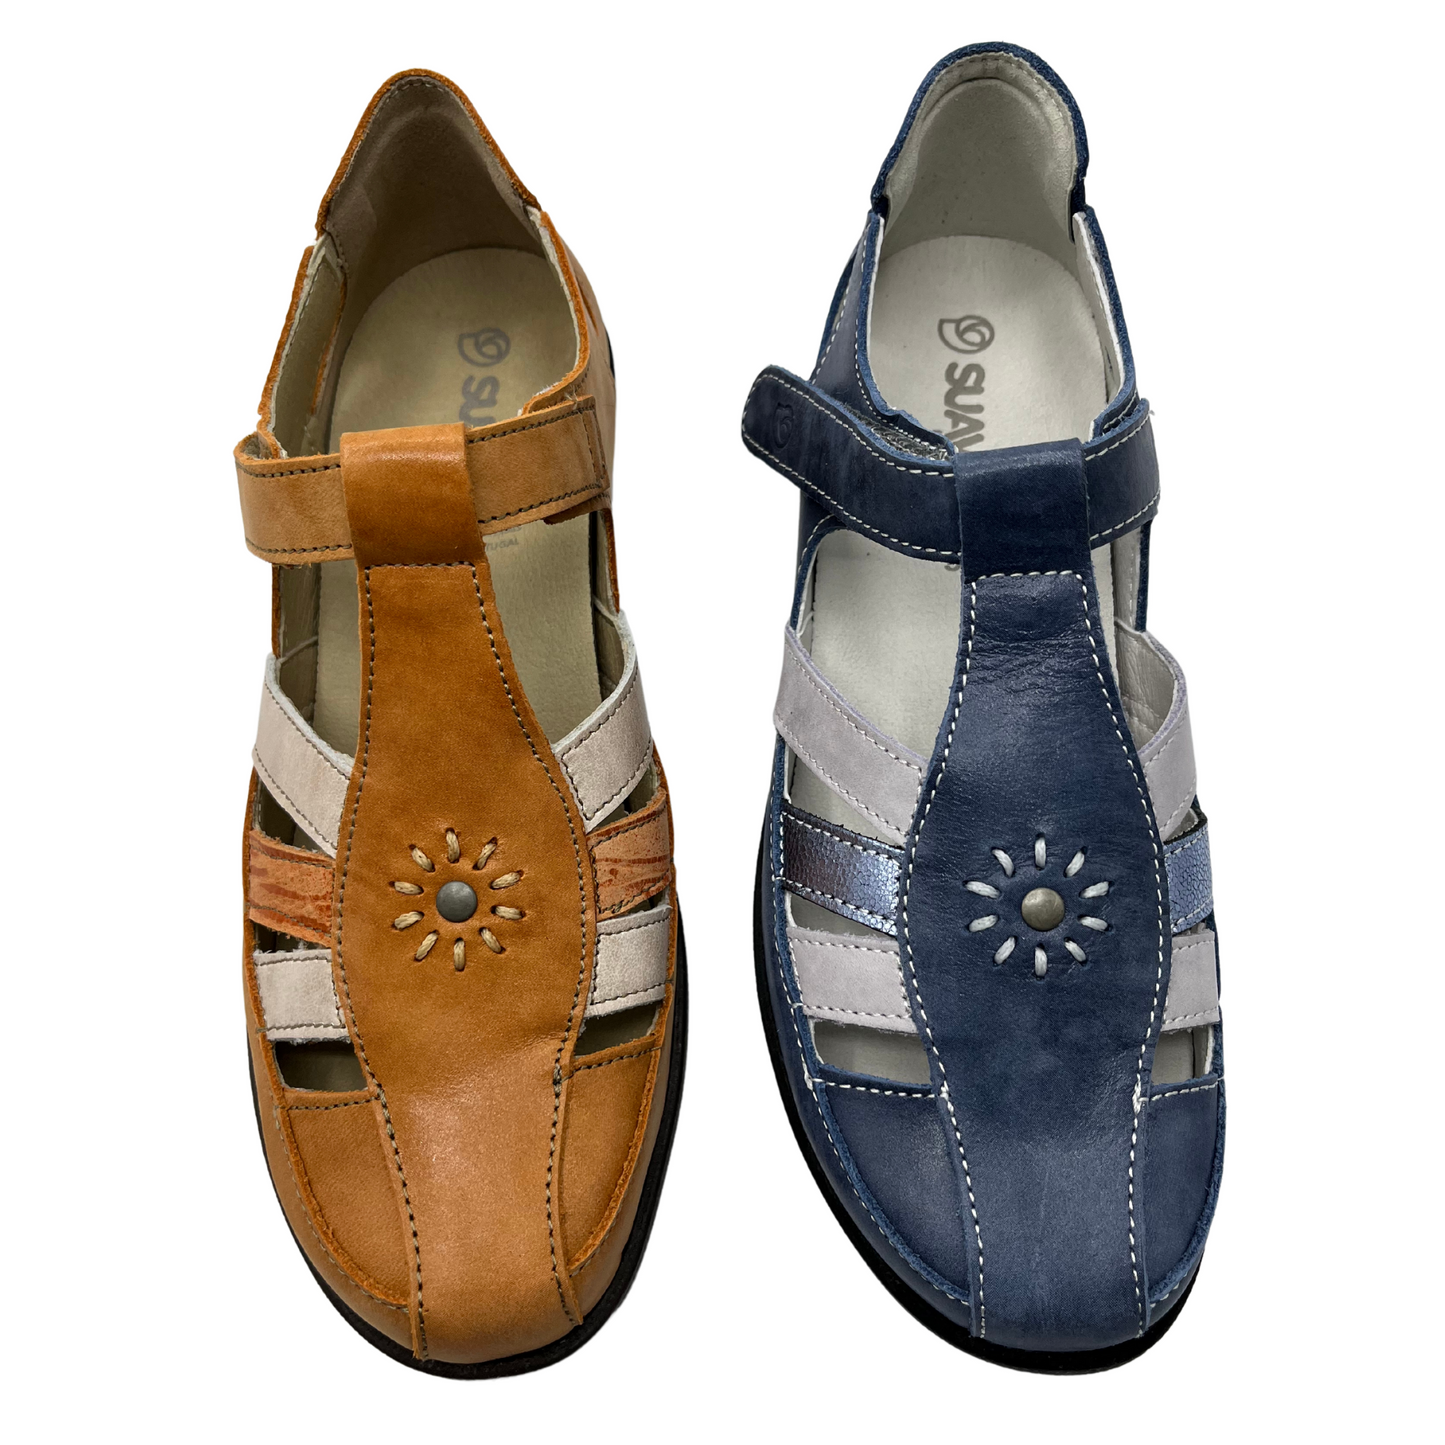 Top view of two leather shoes beside each other. The left one is orange and white and the one on the right is blue and white